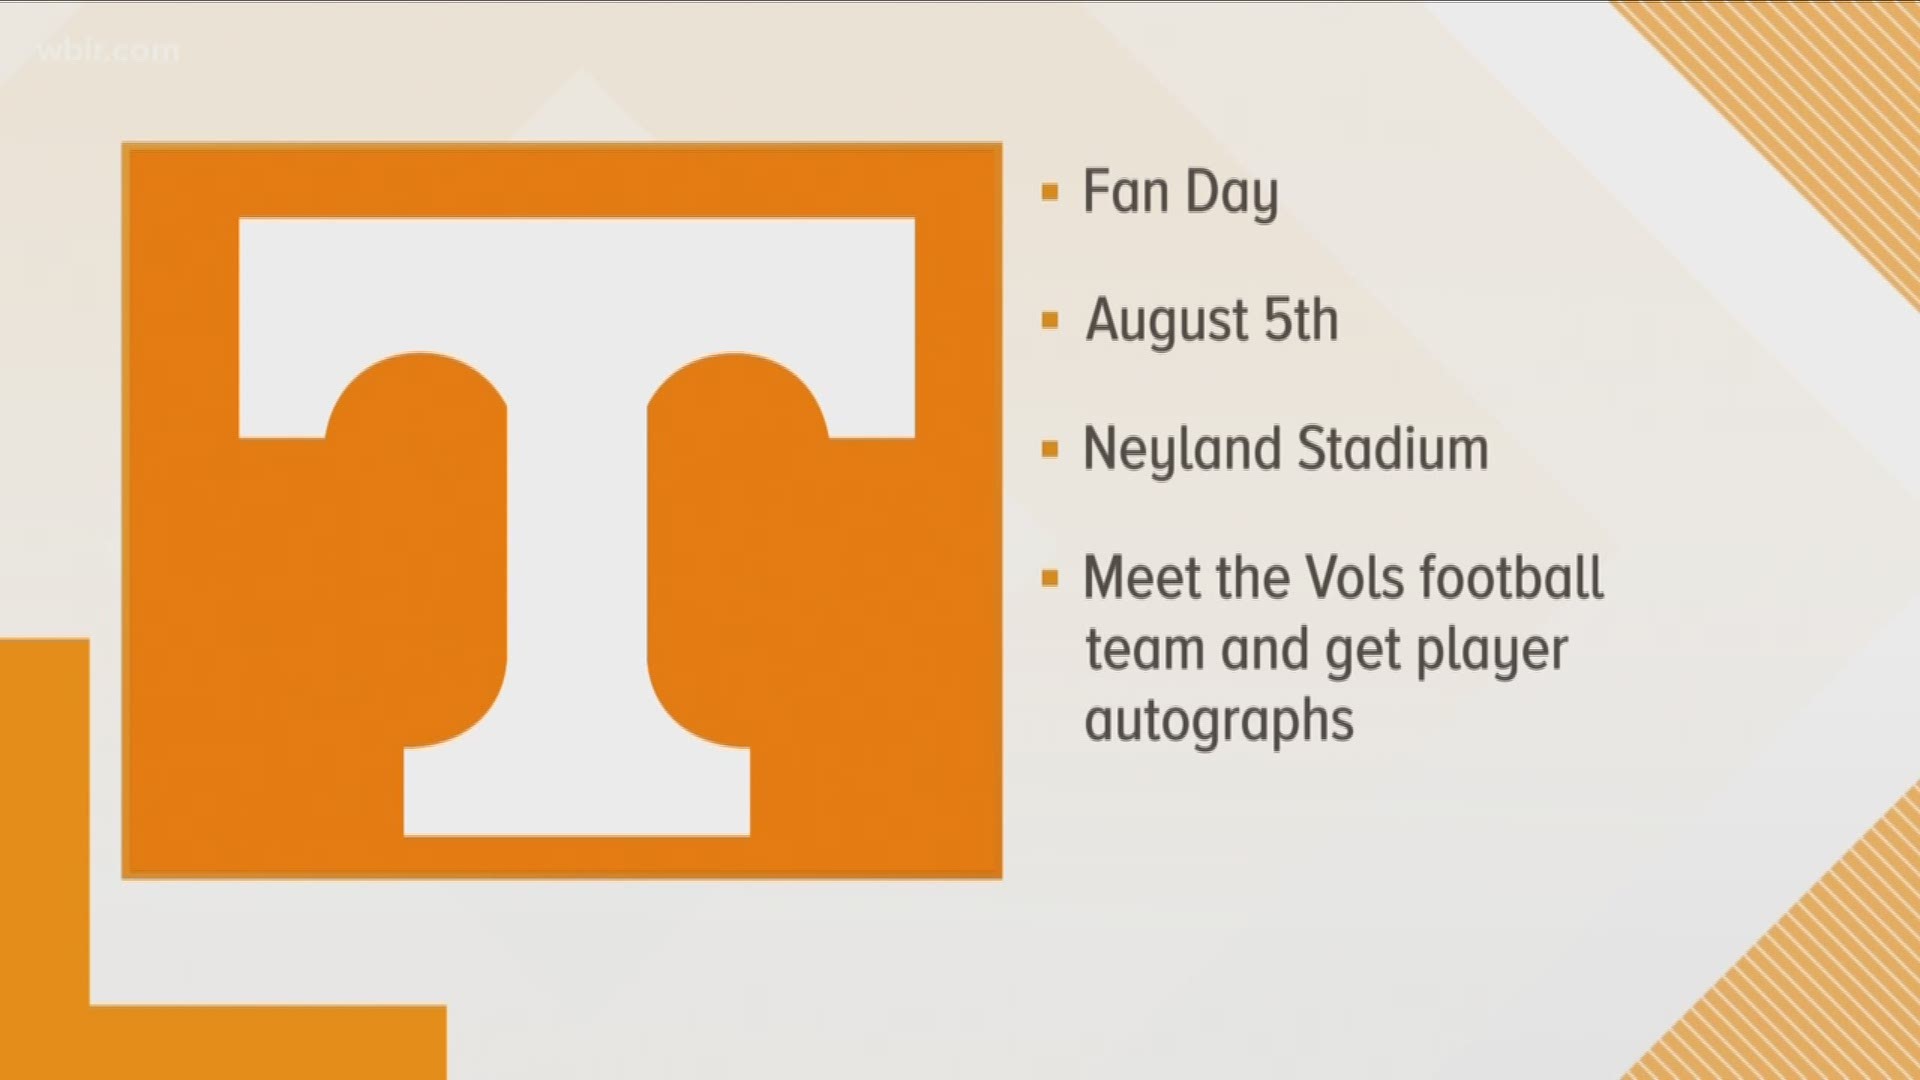 The Vols will host a fan day on August 5th.